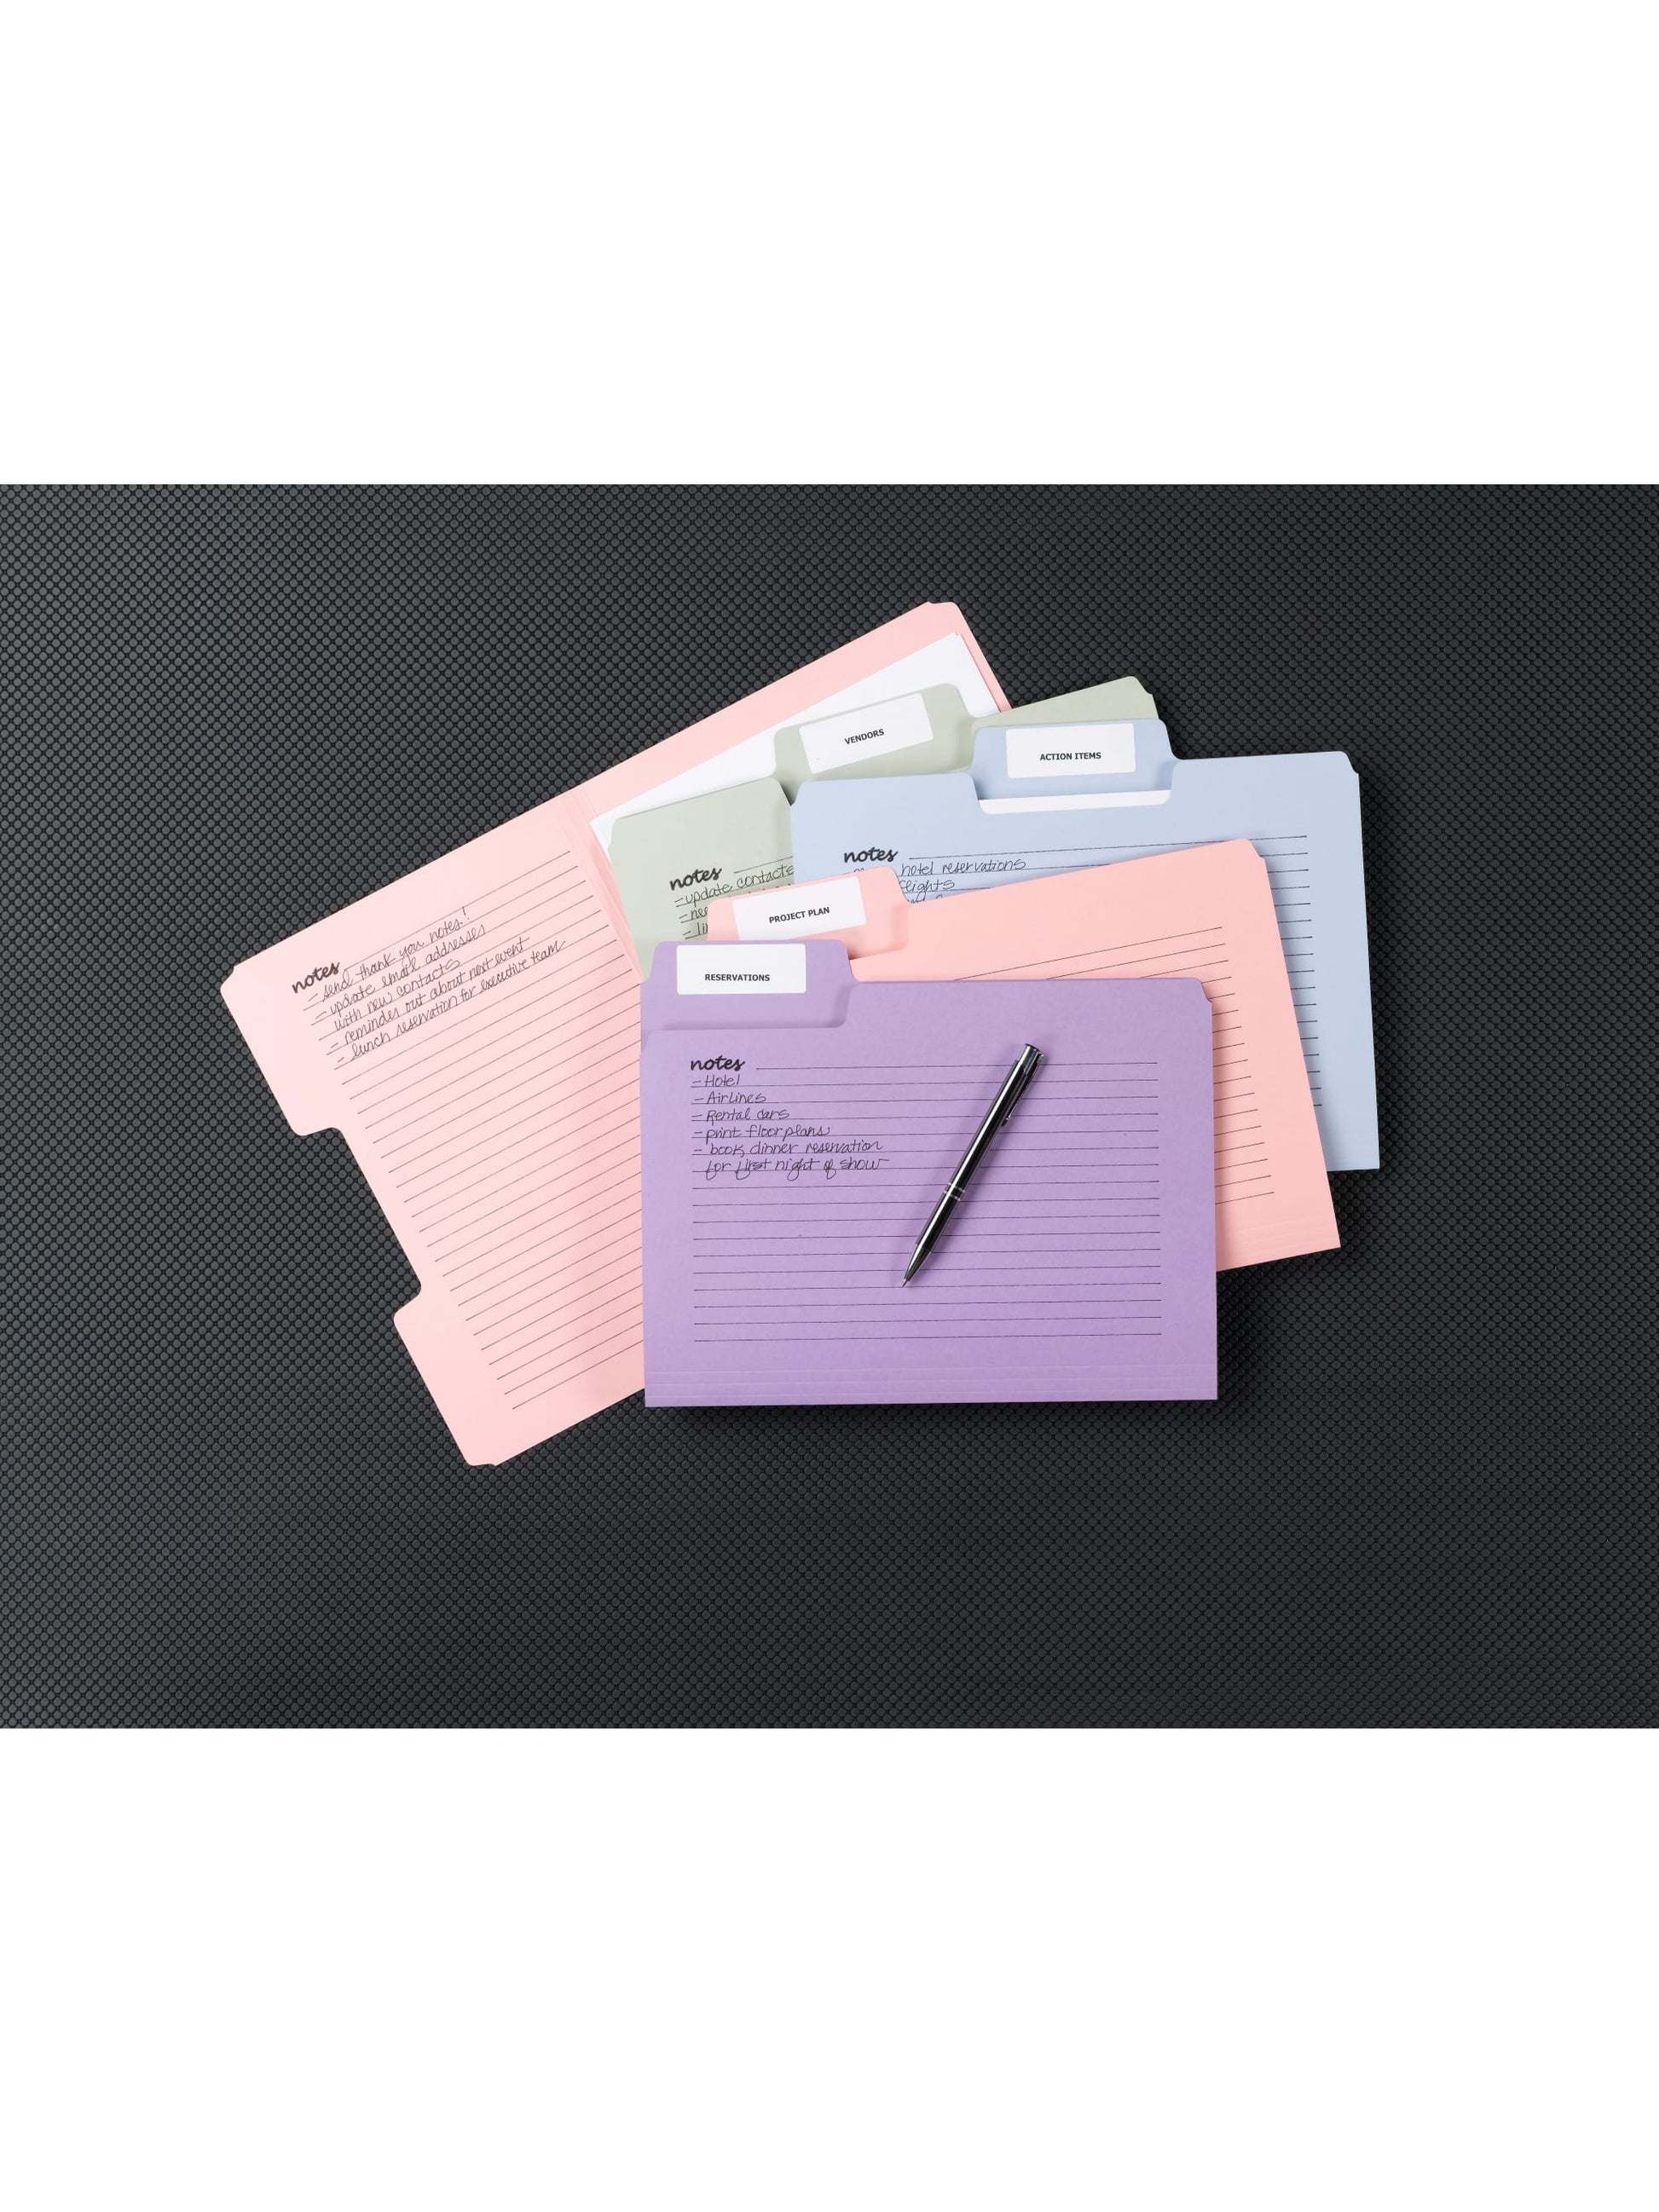 SuperTab® Notes File Folders, 1/3 Cut Tab, Assorted Colors Color, Letter Size, Set of 1, 086486116510